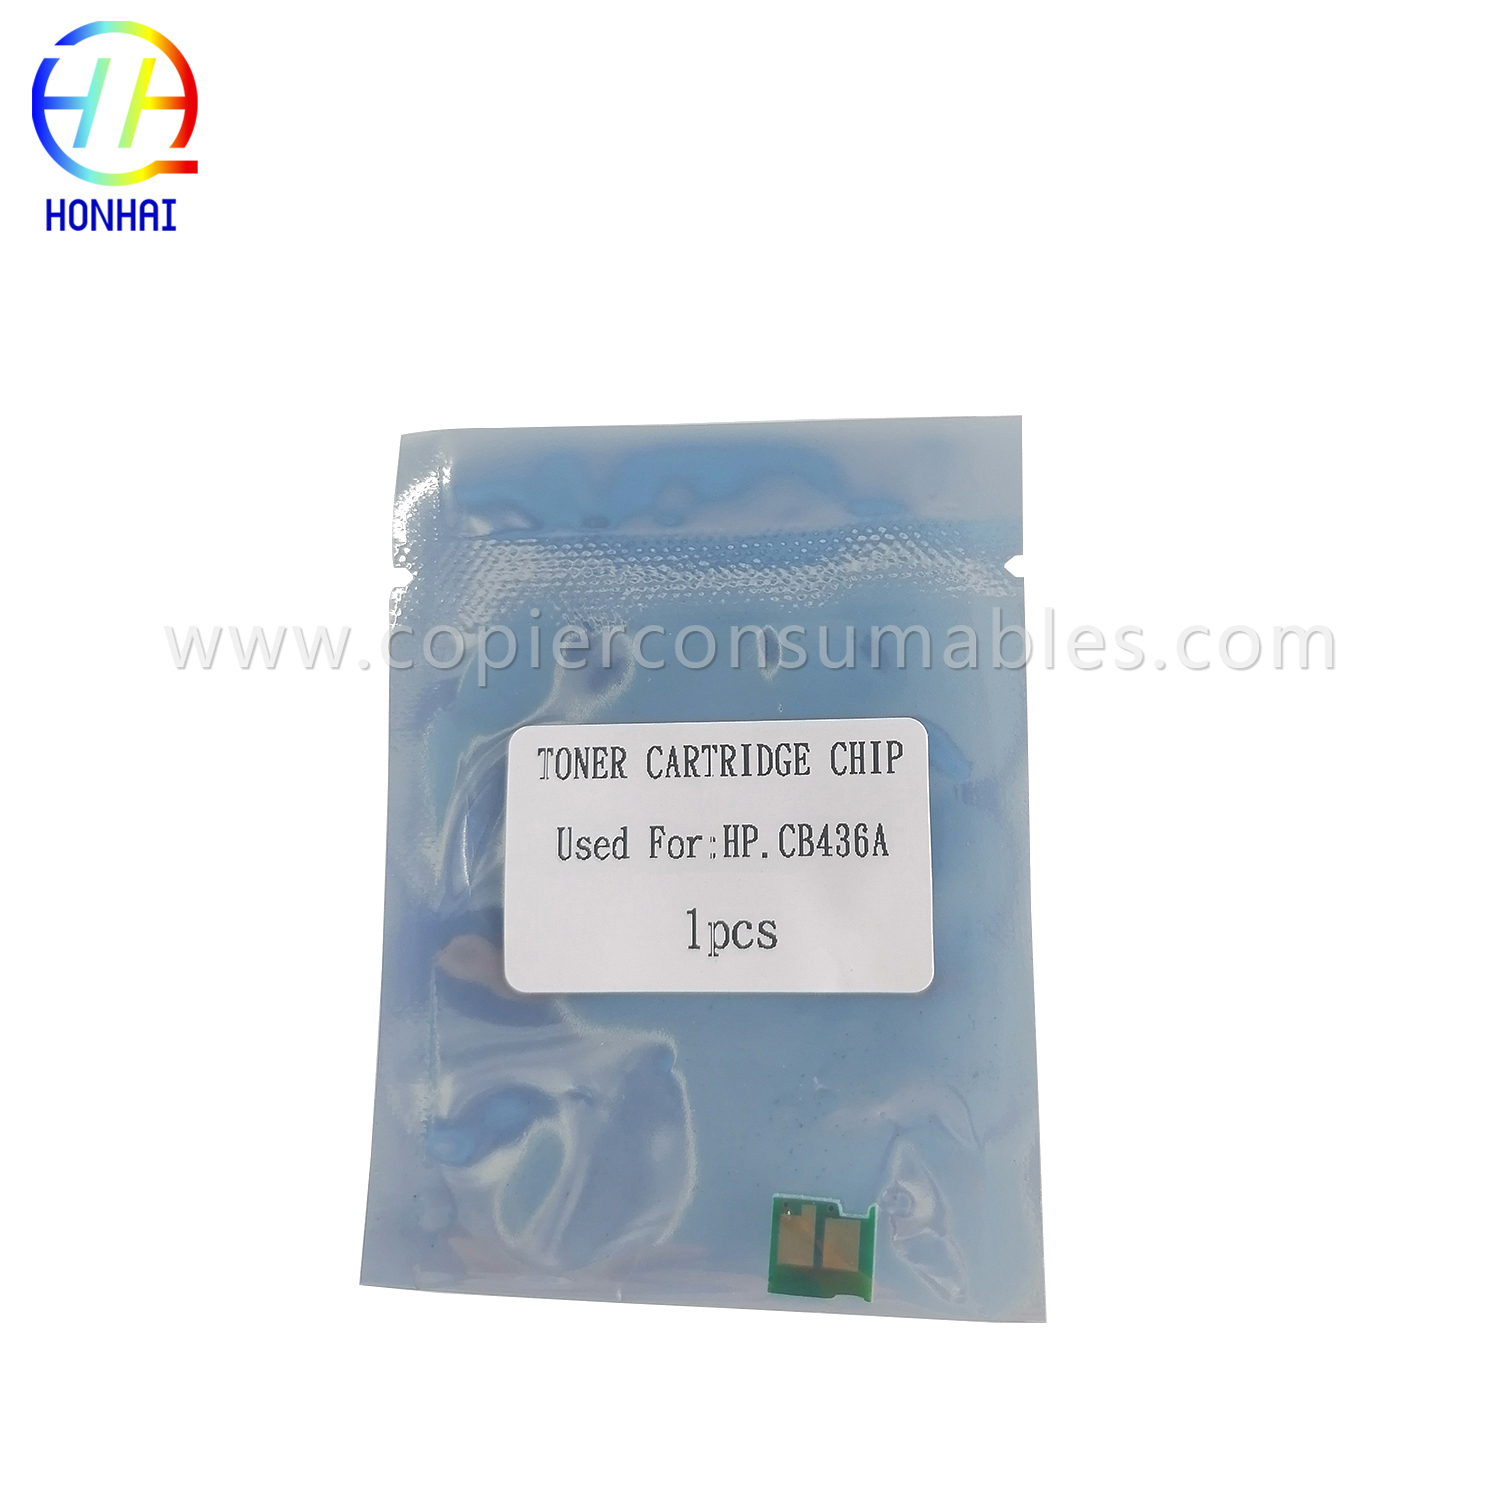 Toner Chip for HP 1505 CB436A